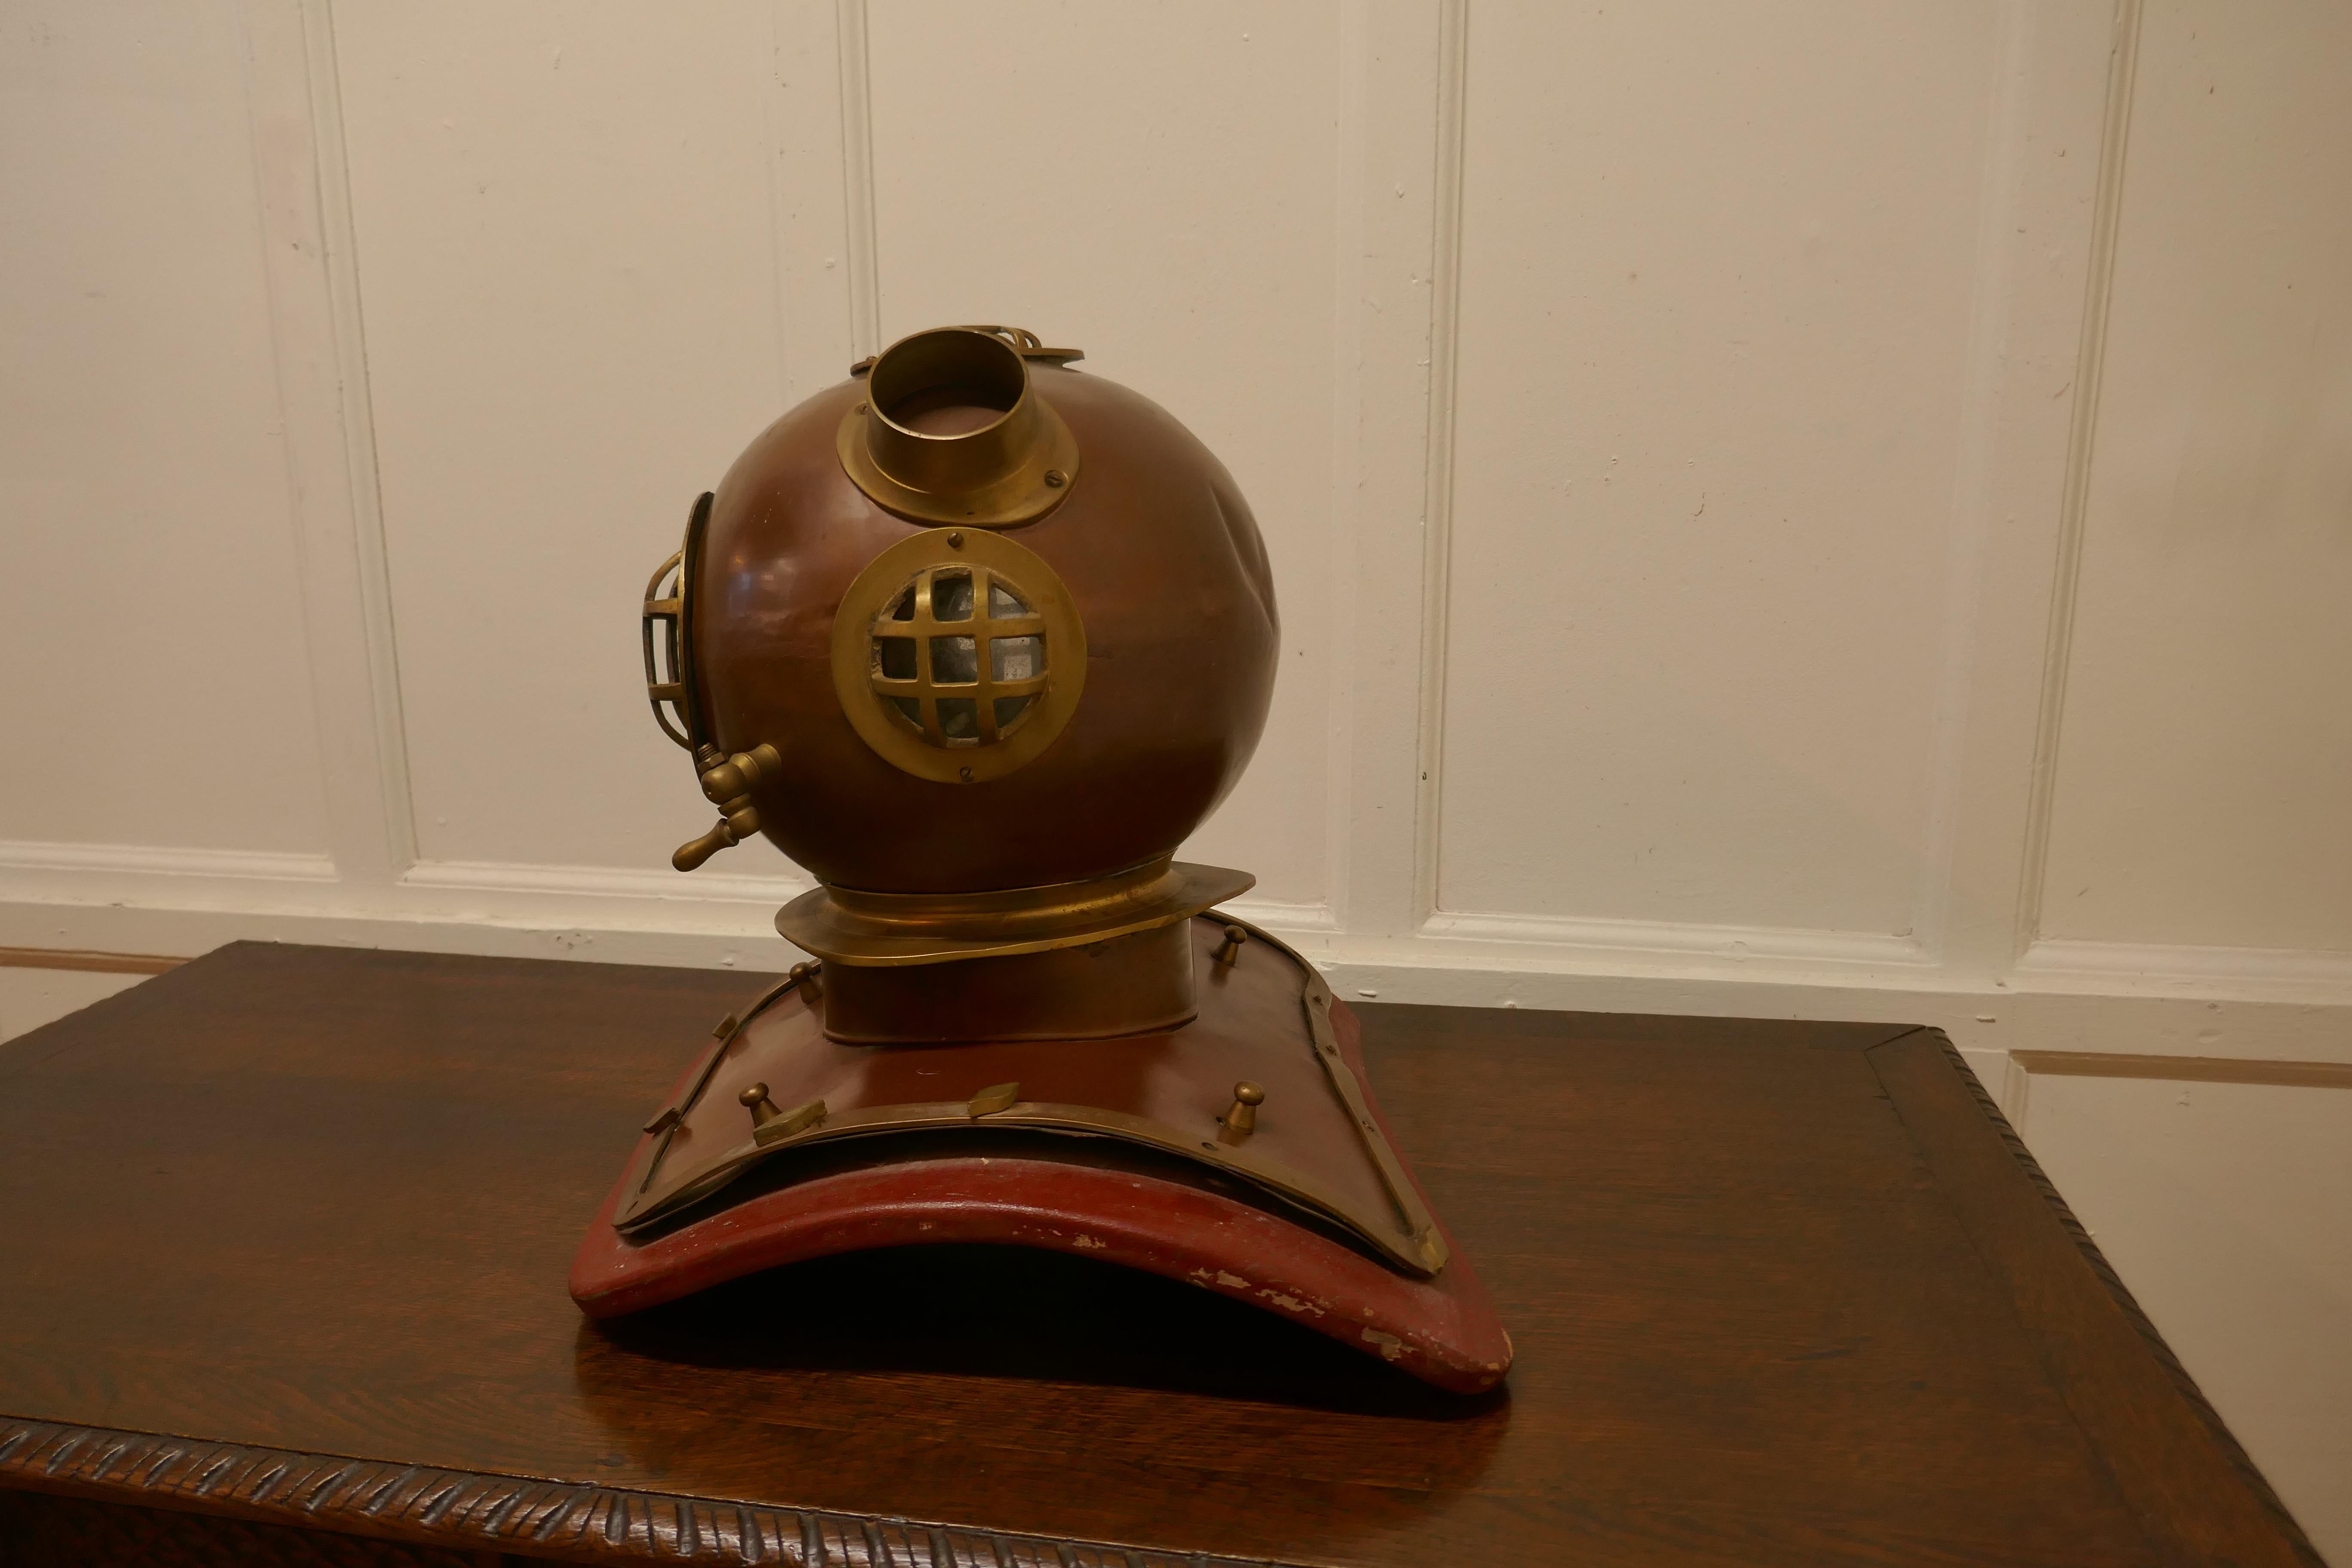 Full Size 1950s Model Divers helmet, shop display piece 

The Helmet is a Rare Piece of Chandlery Shop Display, the helmet is a full size piece made in copper bronze and brass and set on a leather covered woodenshoulder shaped stand
In sound